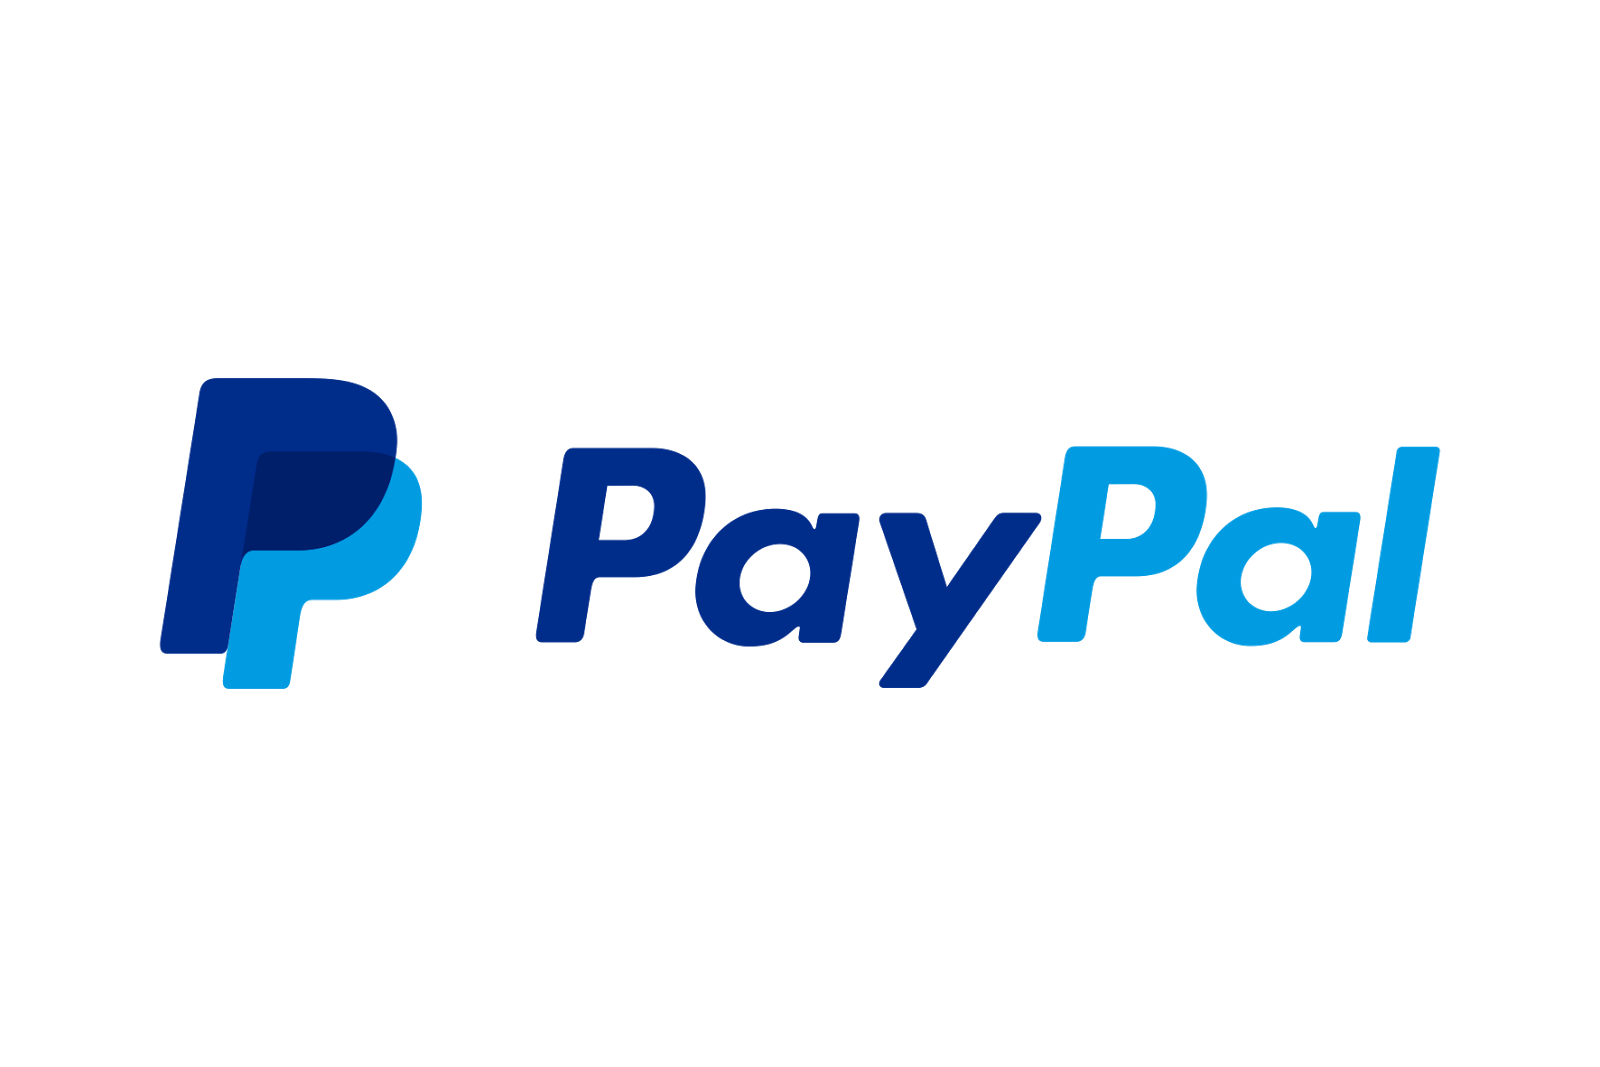 Steam buy paypal фото 84